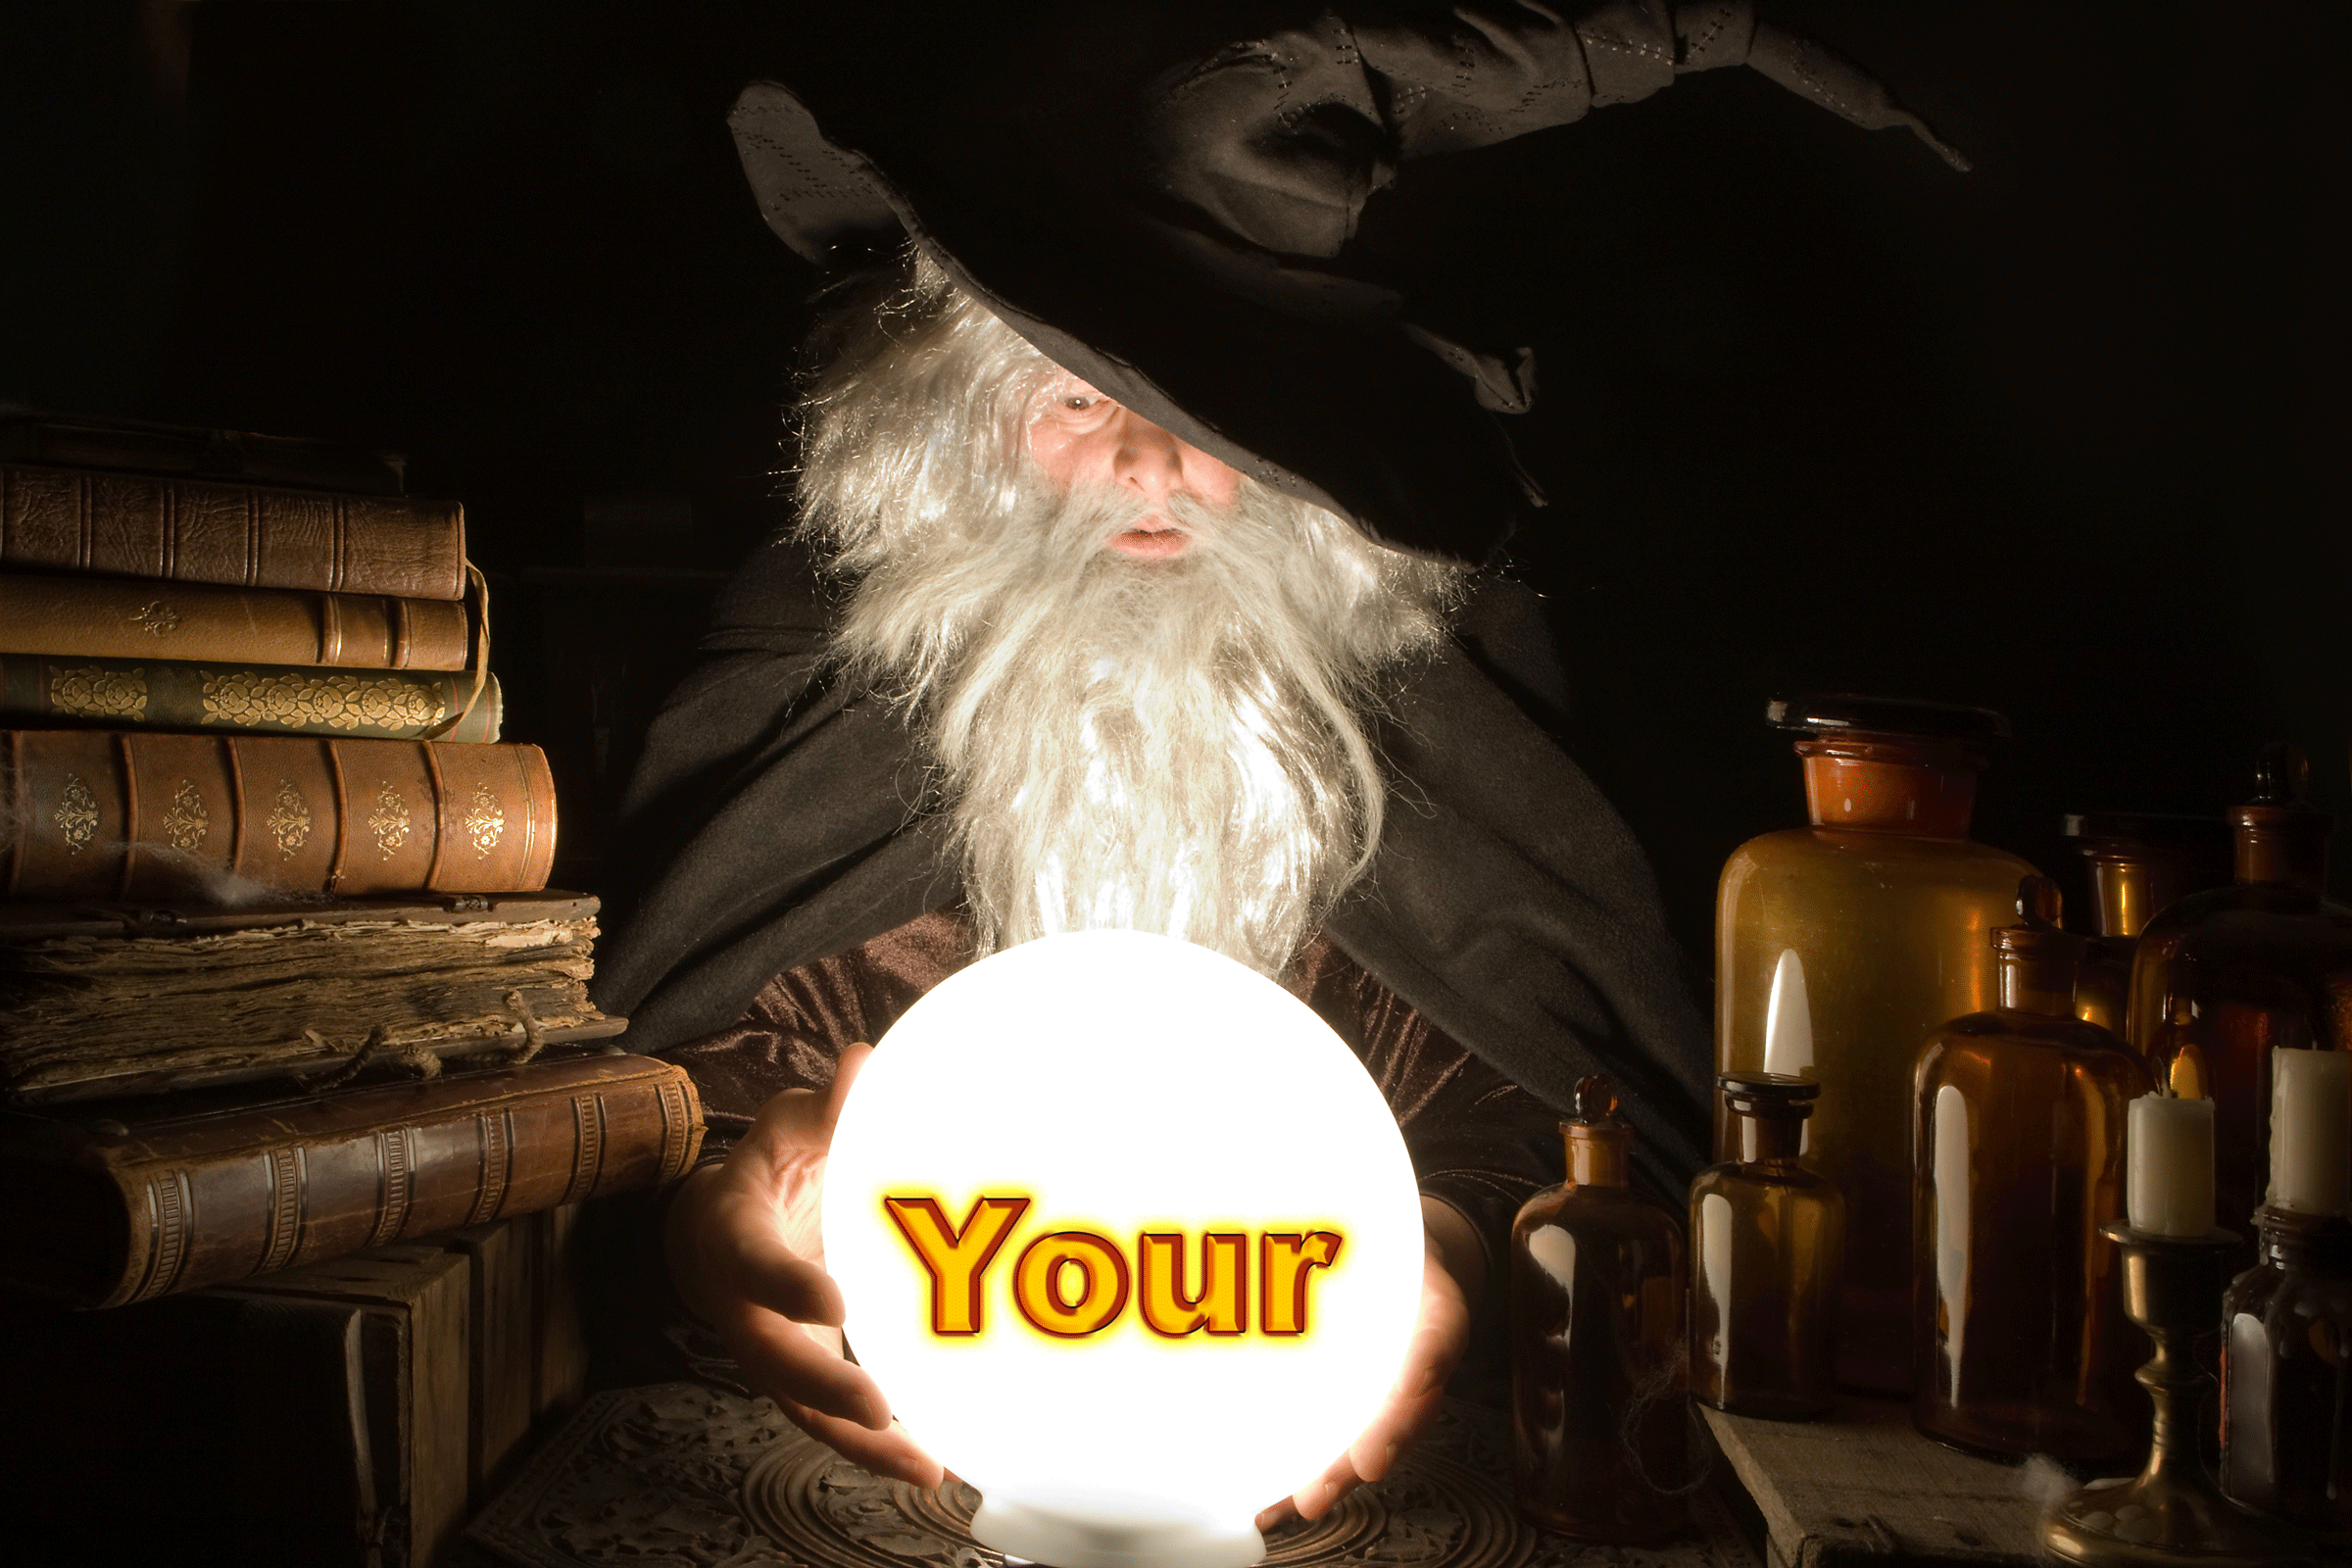 The SEO Wizard says you need more SEO!